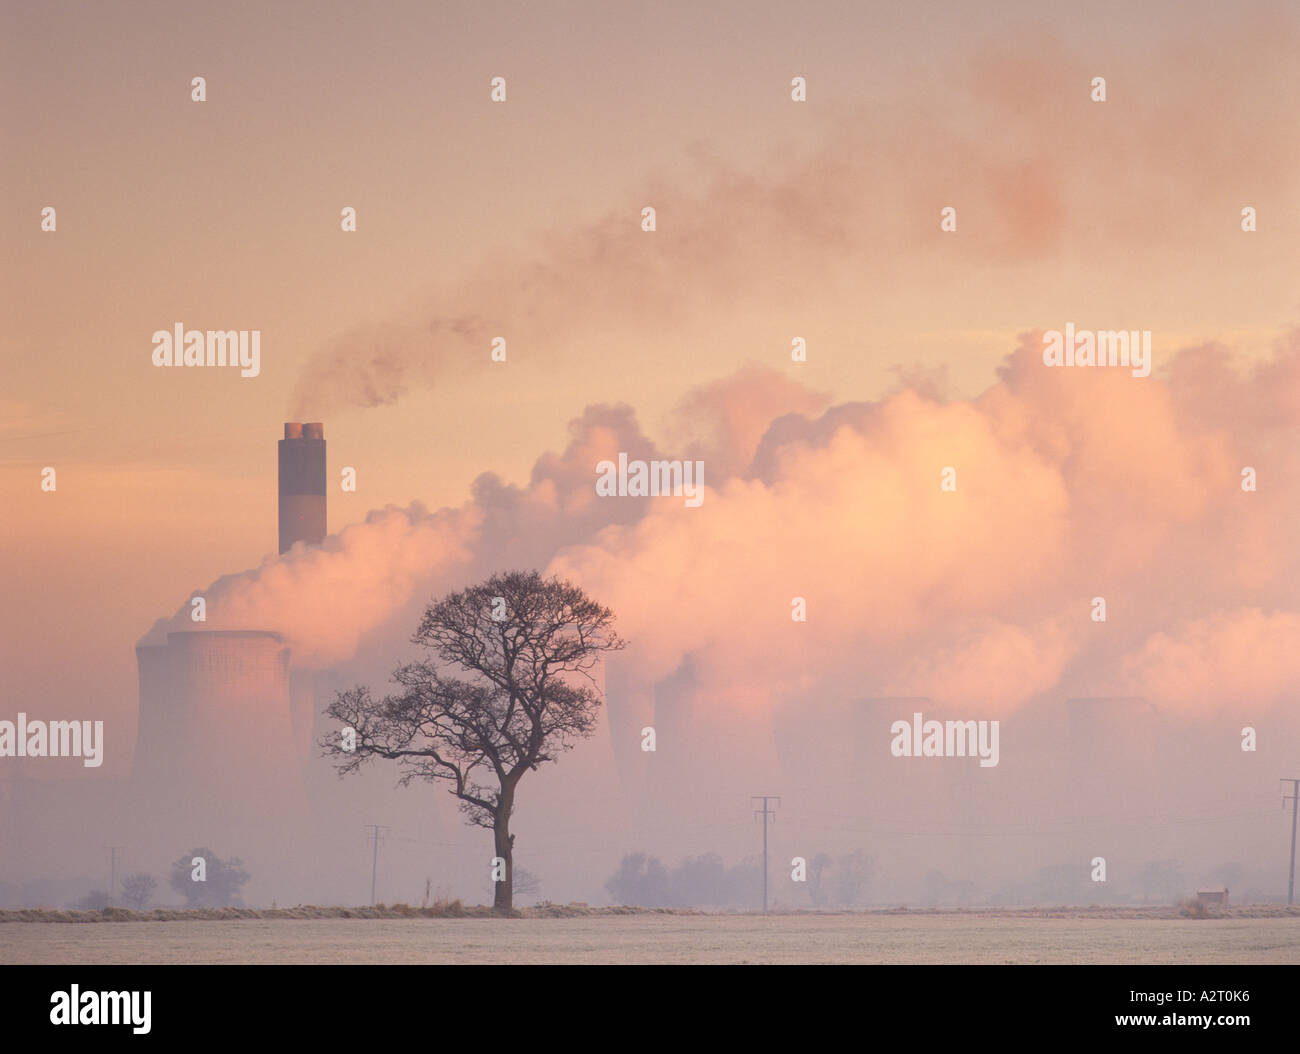 Drax Power Station, vicino a Selby, North Yorkshire, Inghilterra. Foto Stock